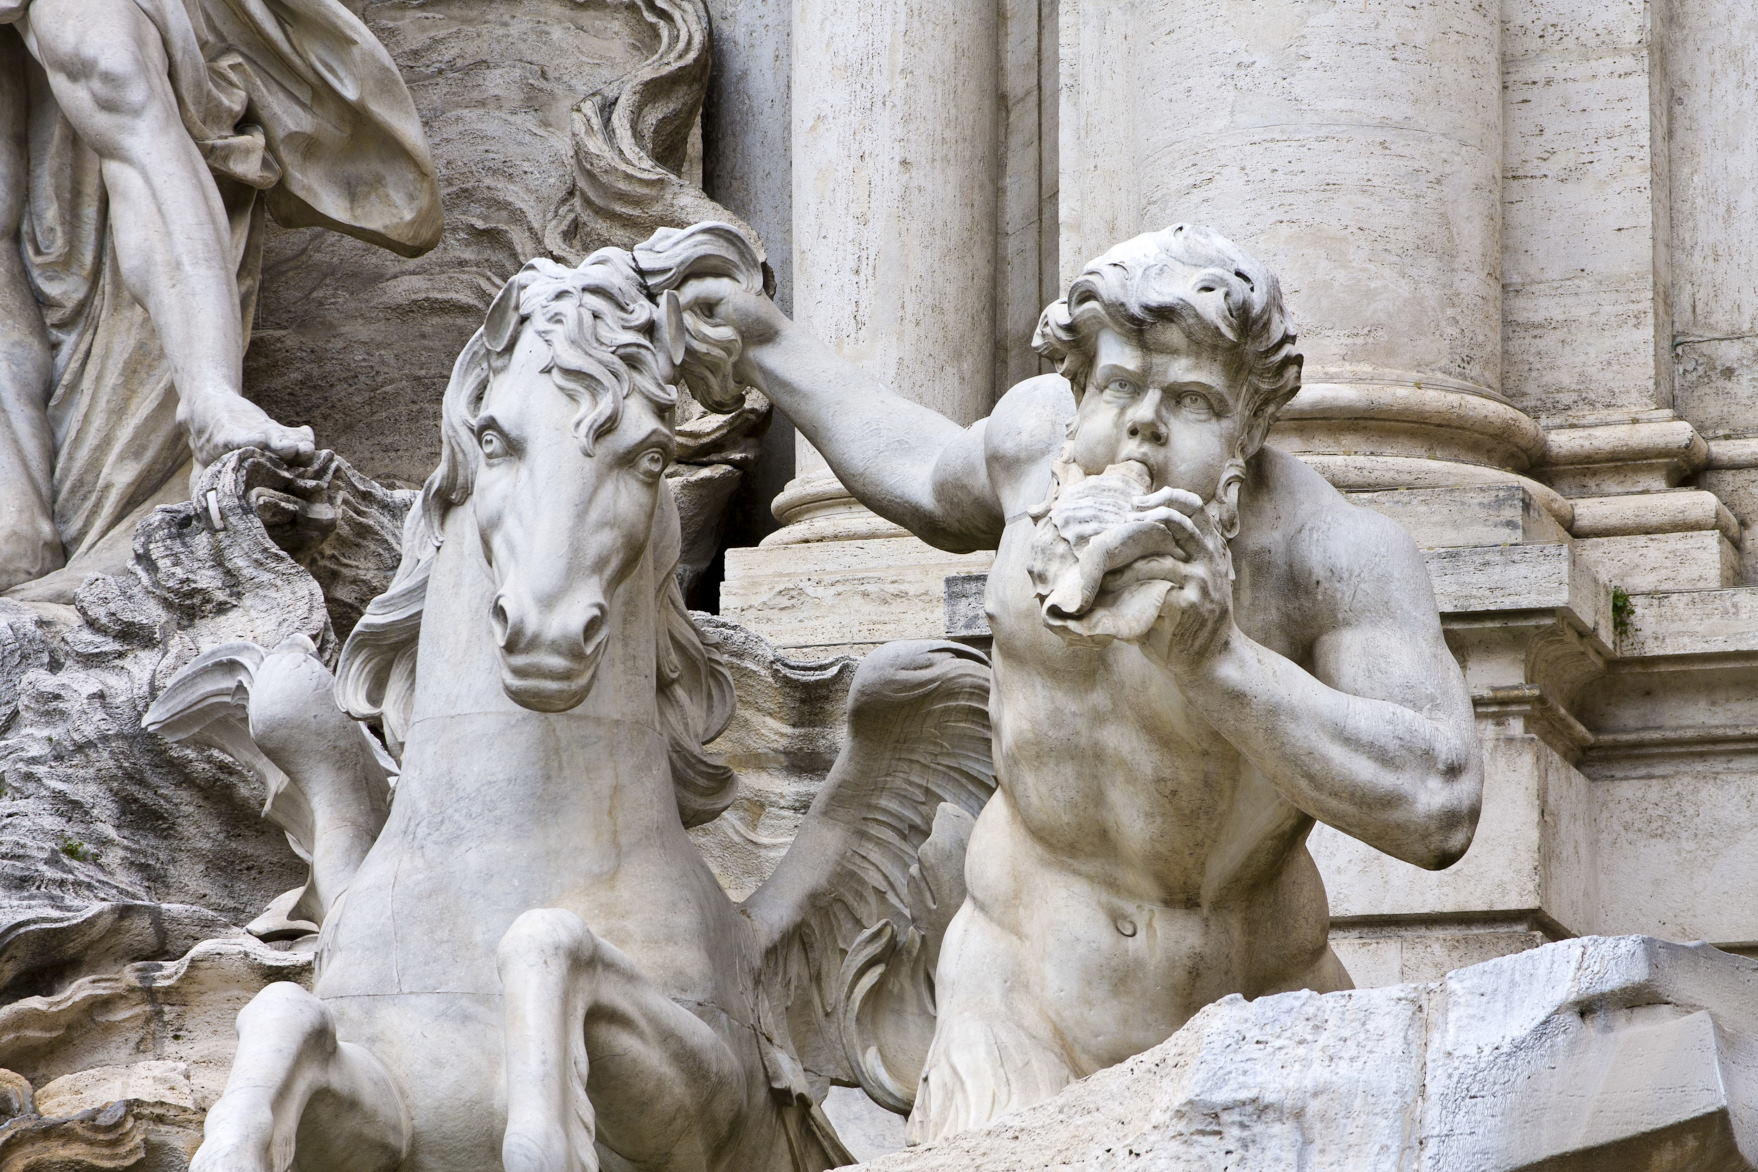 The sculptures of the Ocean and the two tritons, with the winged horses in the central part in Trevi Fountain, Rome, Italy (2)